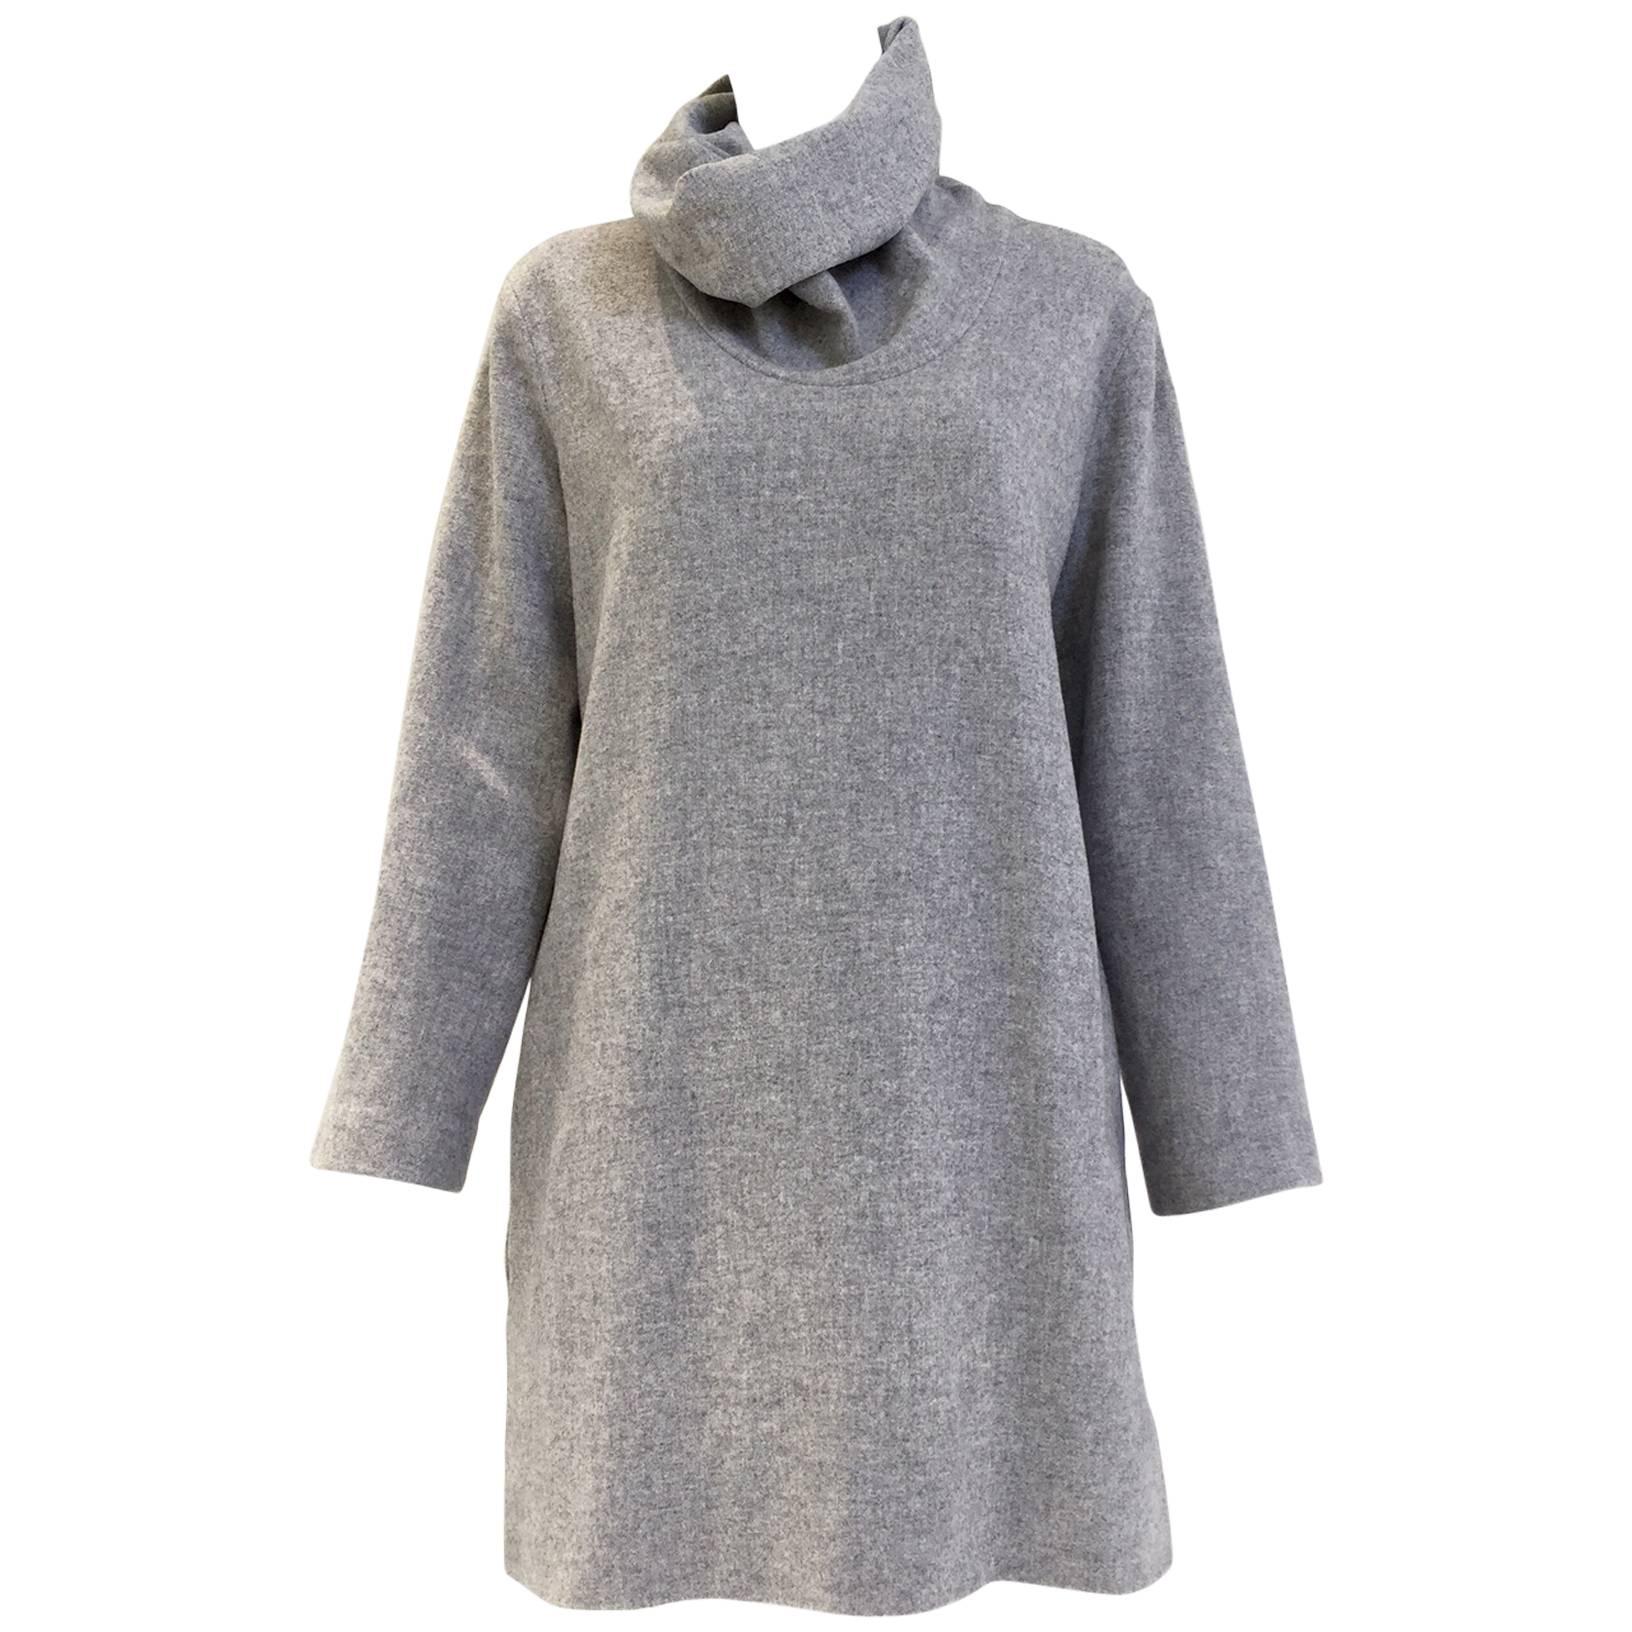 90s Jean Paul Gaultier grey wool and cashmere dress For Sale